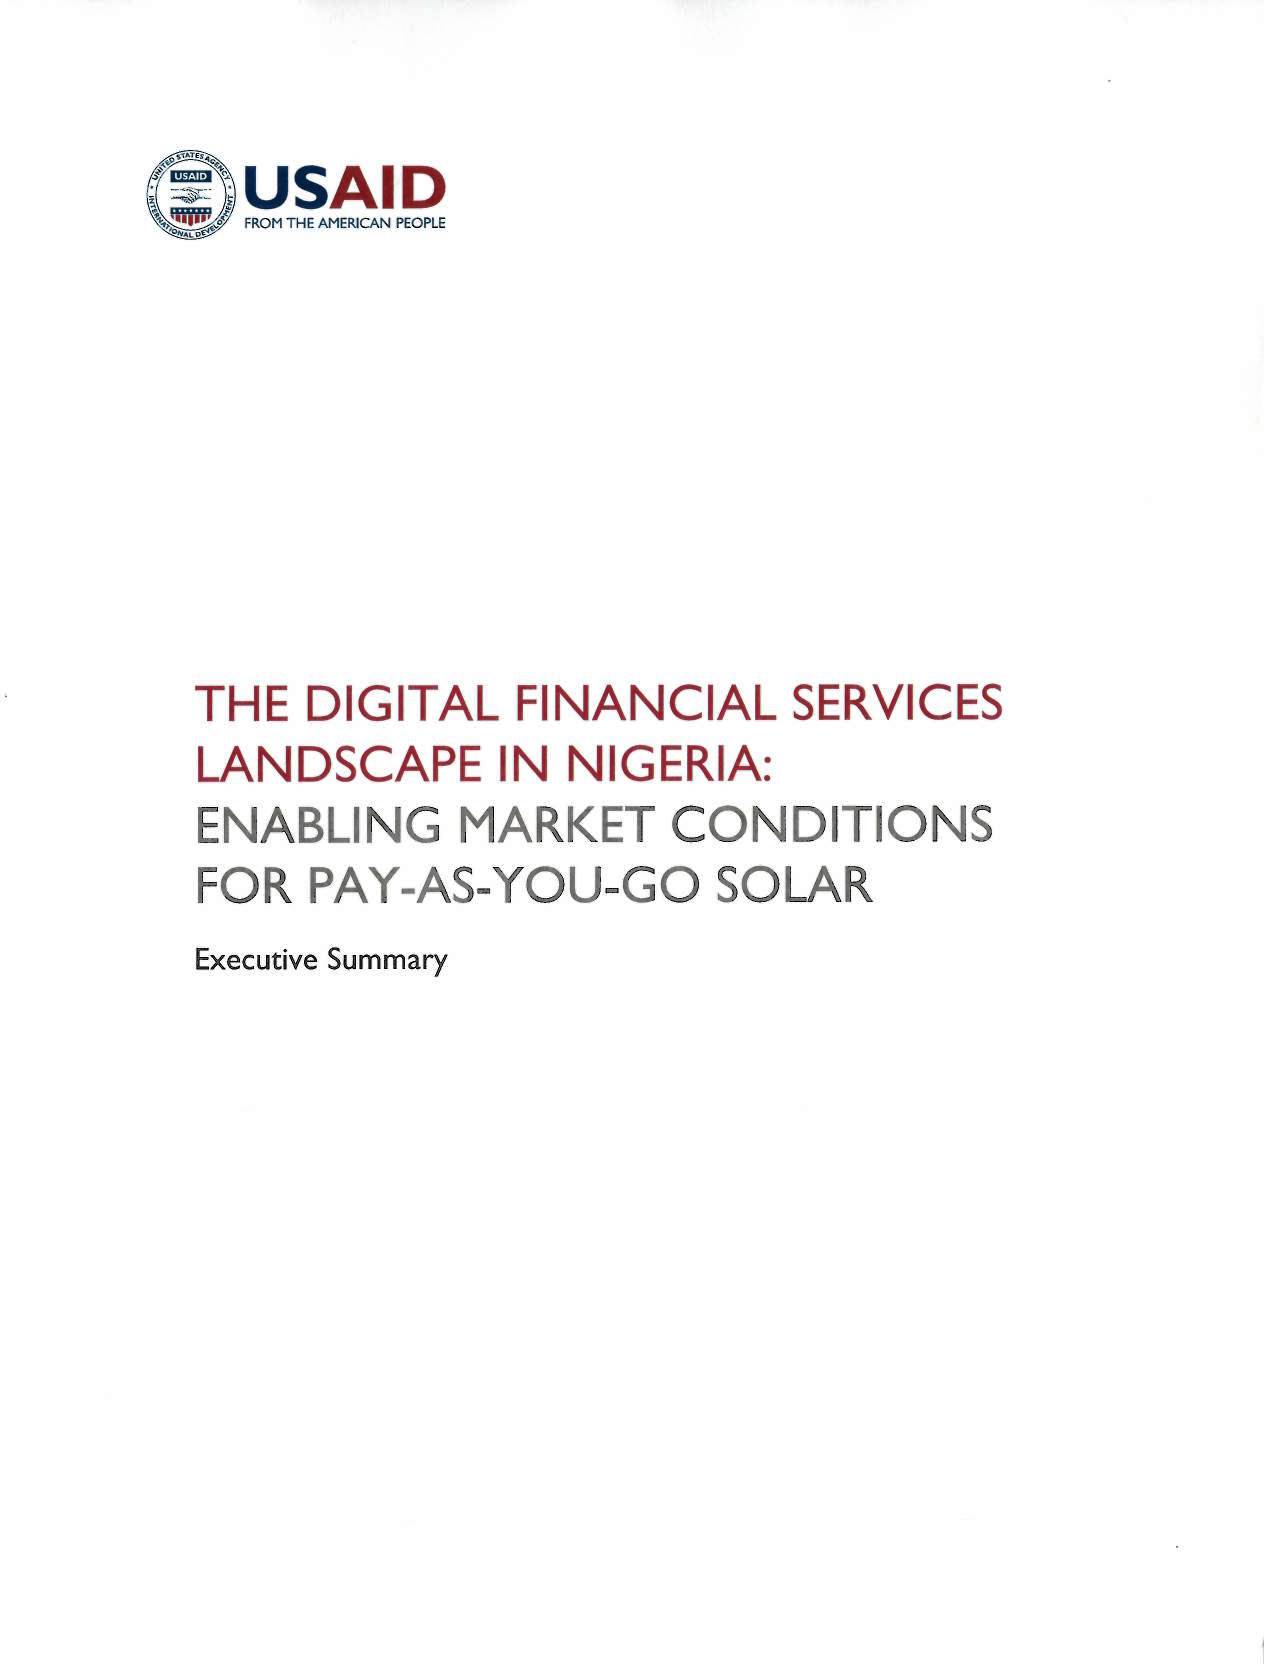 The Digital Financial Services Landscape in Nigeria: Enabling Market Conditions for Pay-as-you-go Solar - Executive Summary